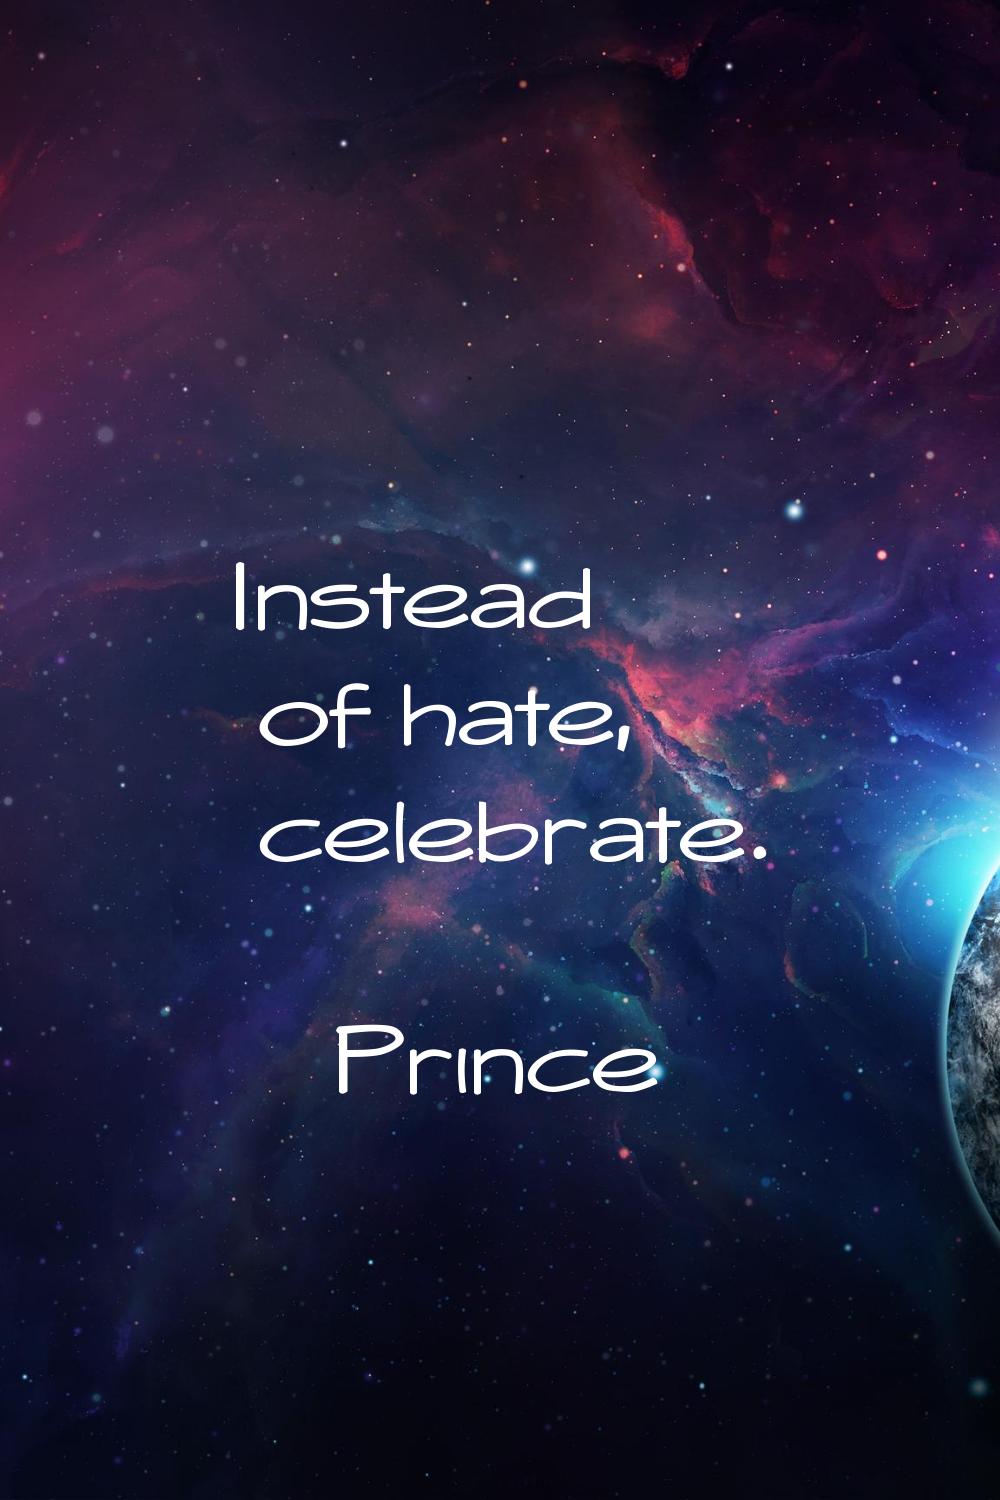 Instead of hate, celebrate.